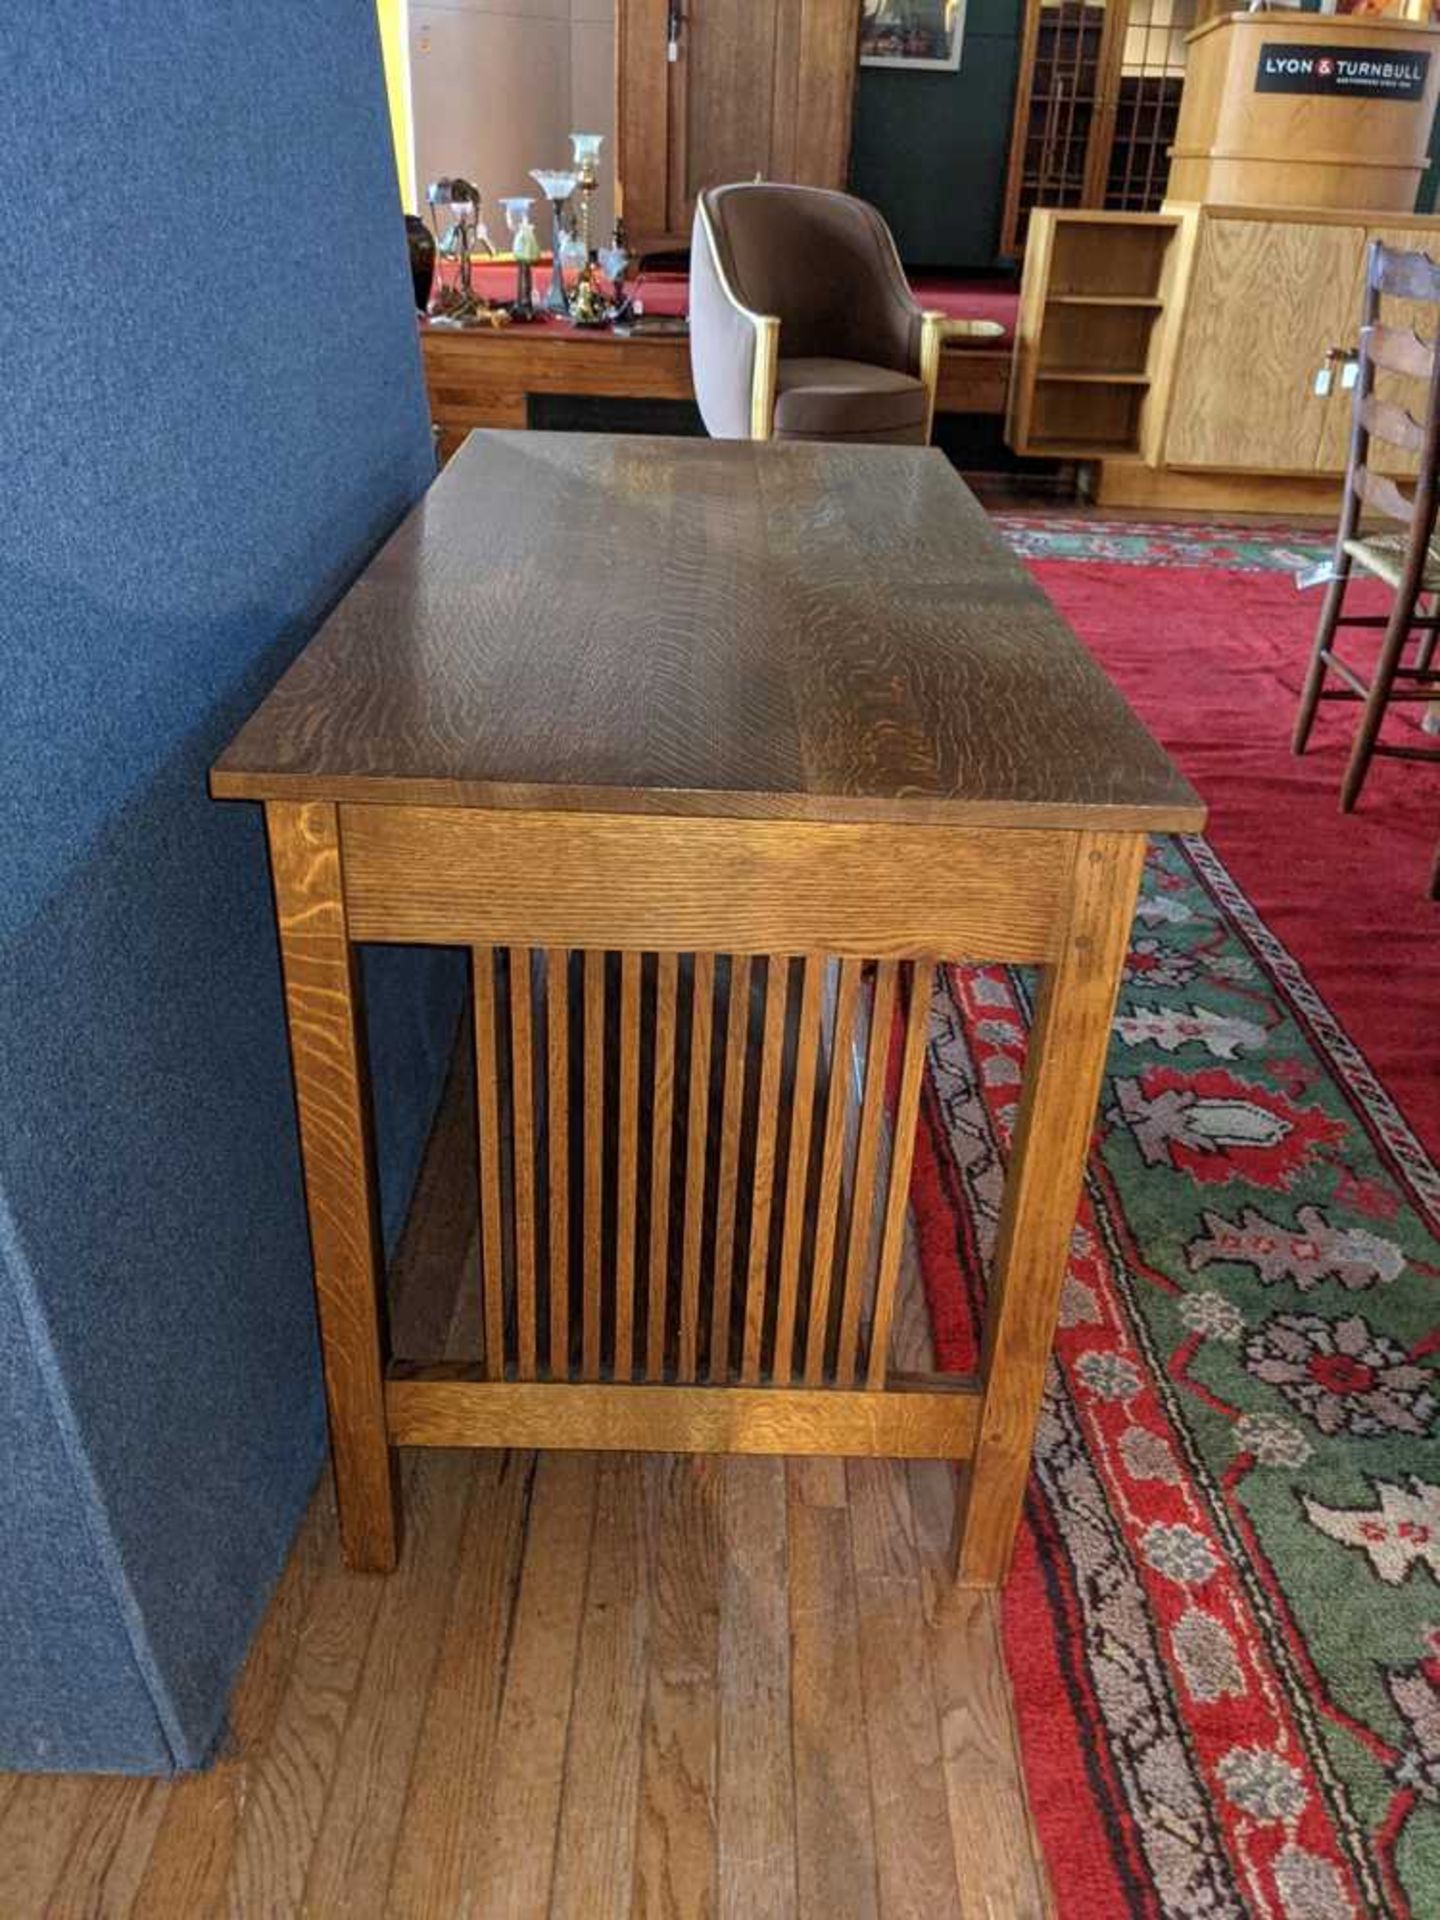 L. & J. G. STICKLEY DESK AND CHAIR, LATE 20TH CENTURY - Image 8 of 13